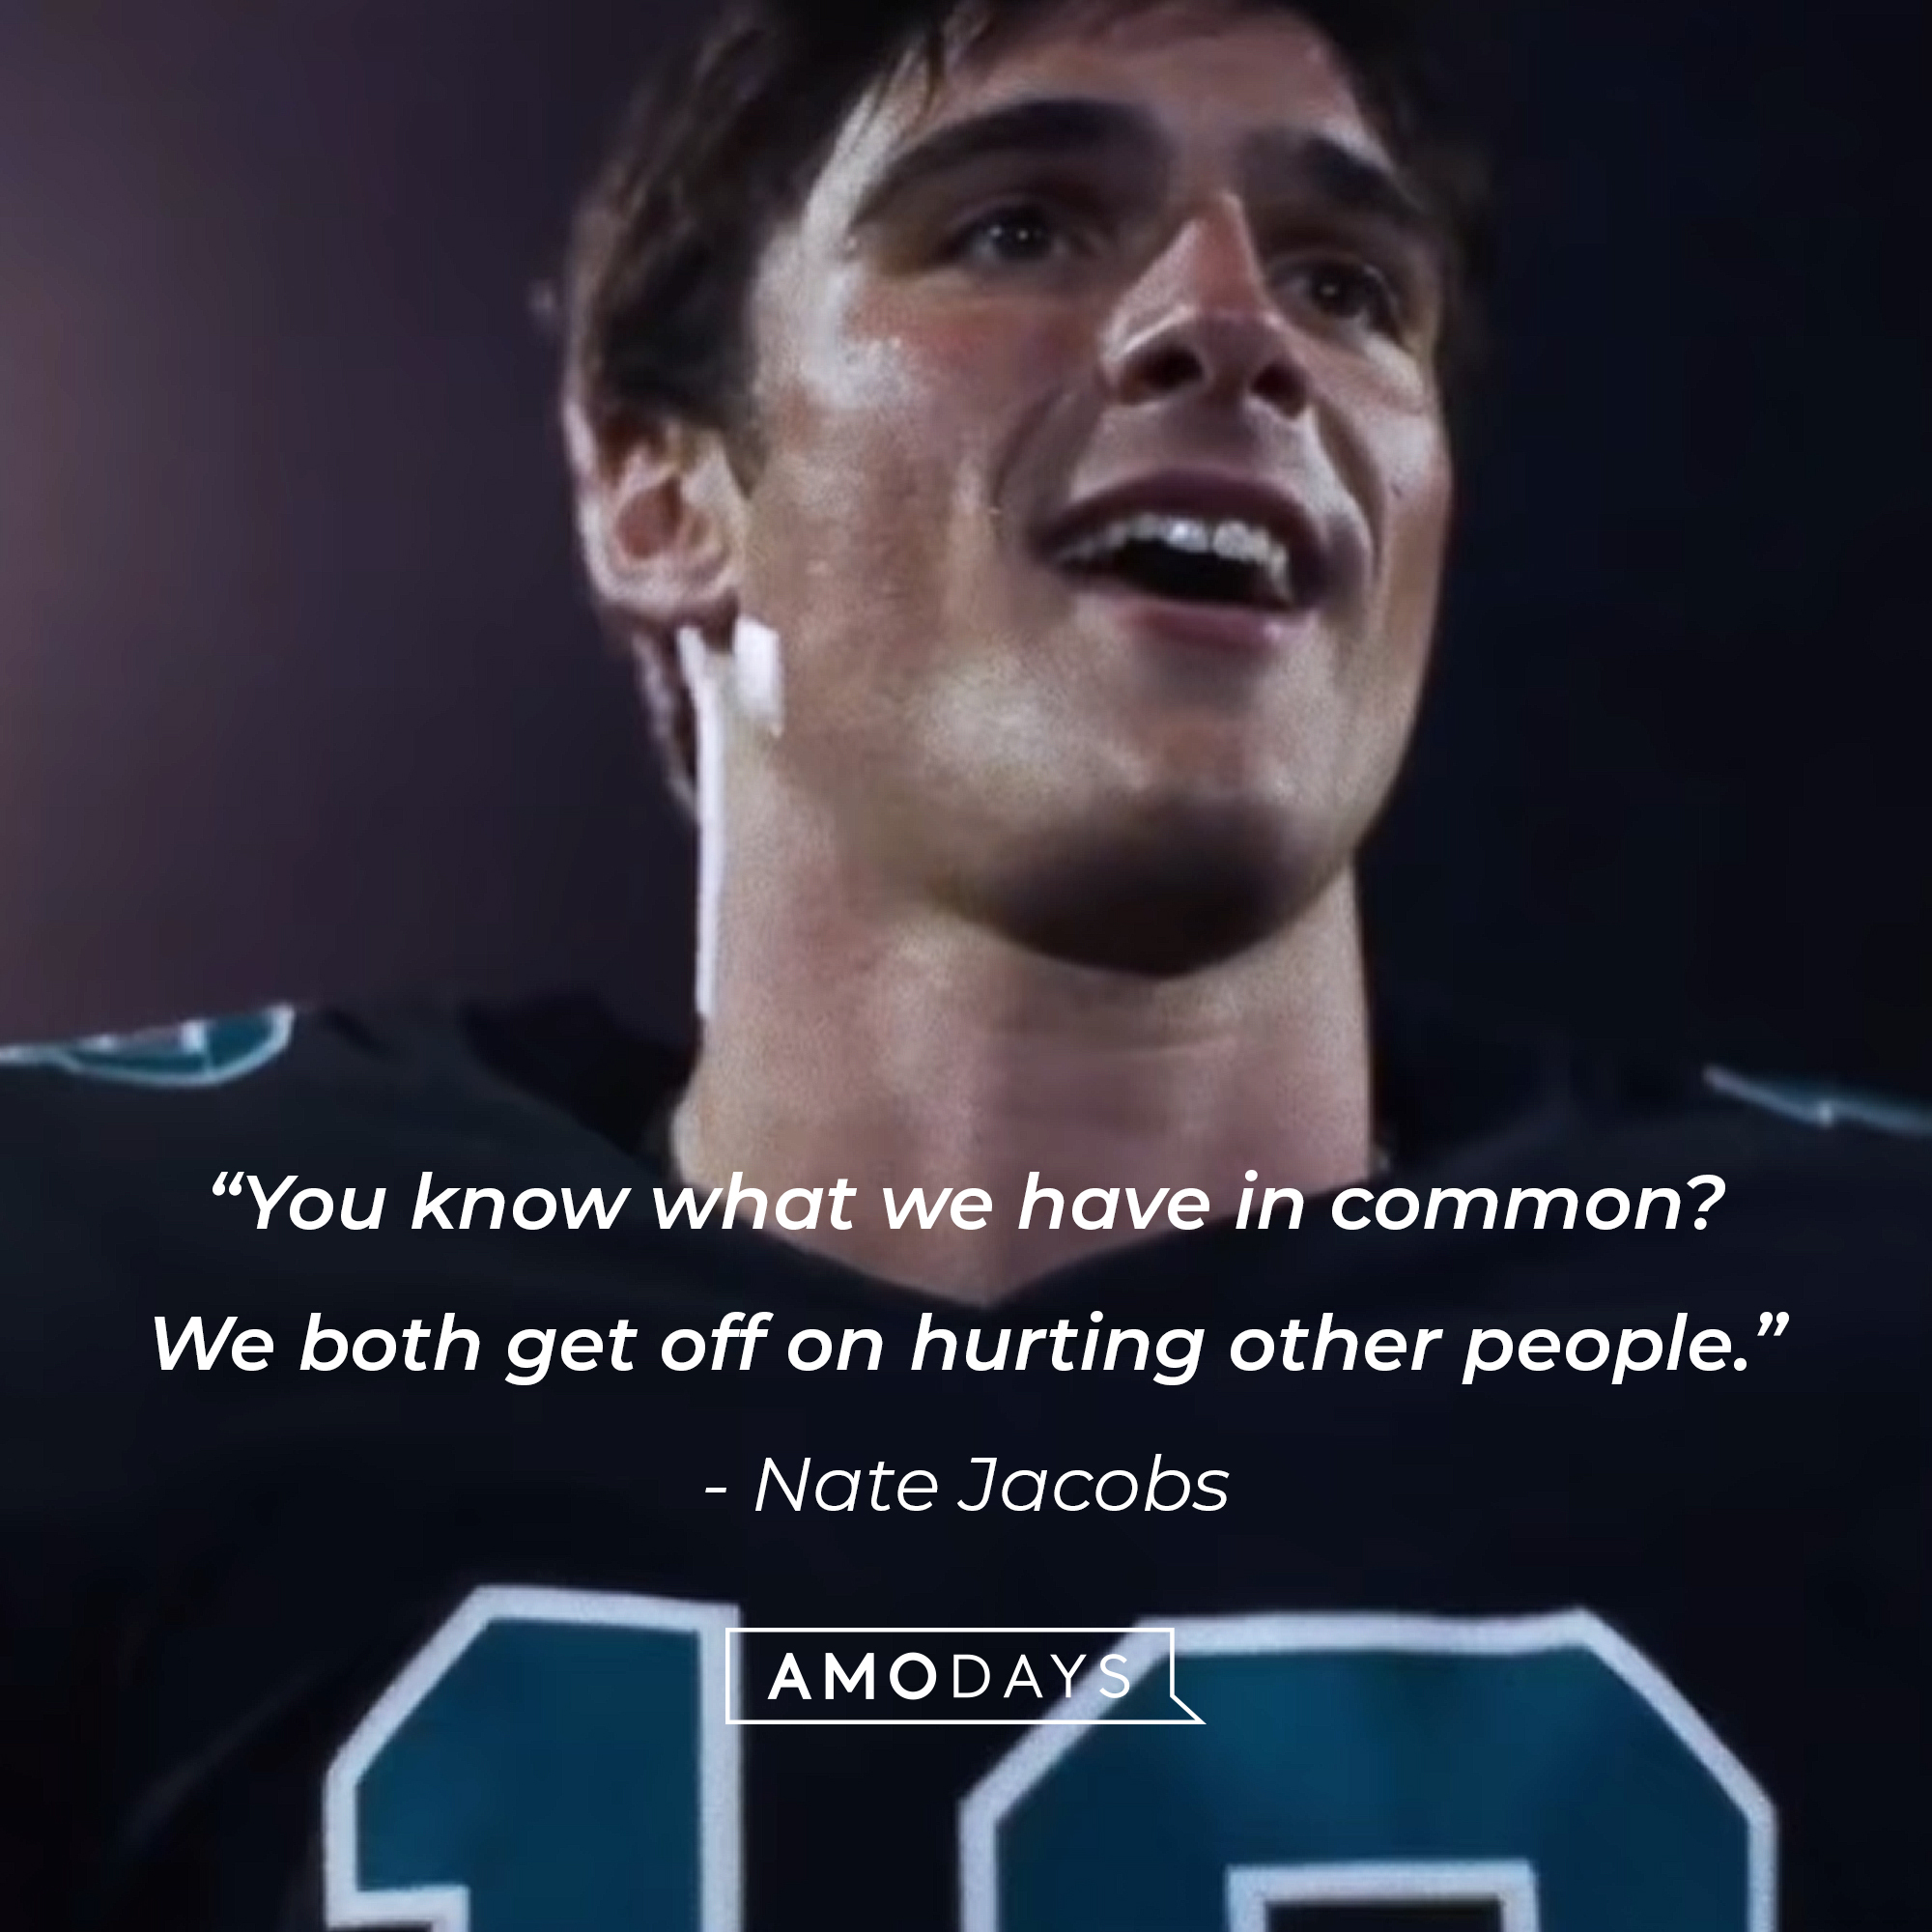 An image of Nate Jacobs, with his quote:“You know what we have in common? We both get off on hurting other people.”  | Source: HBO